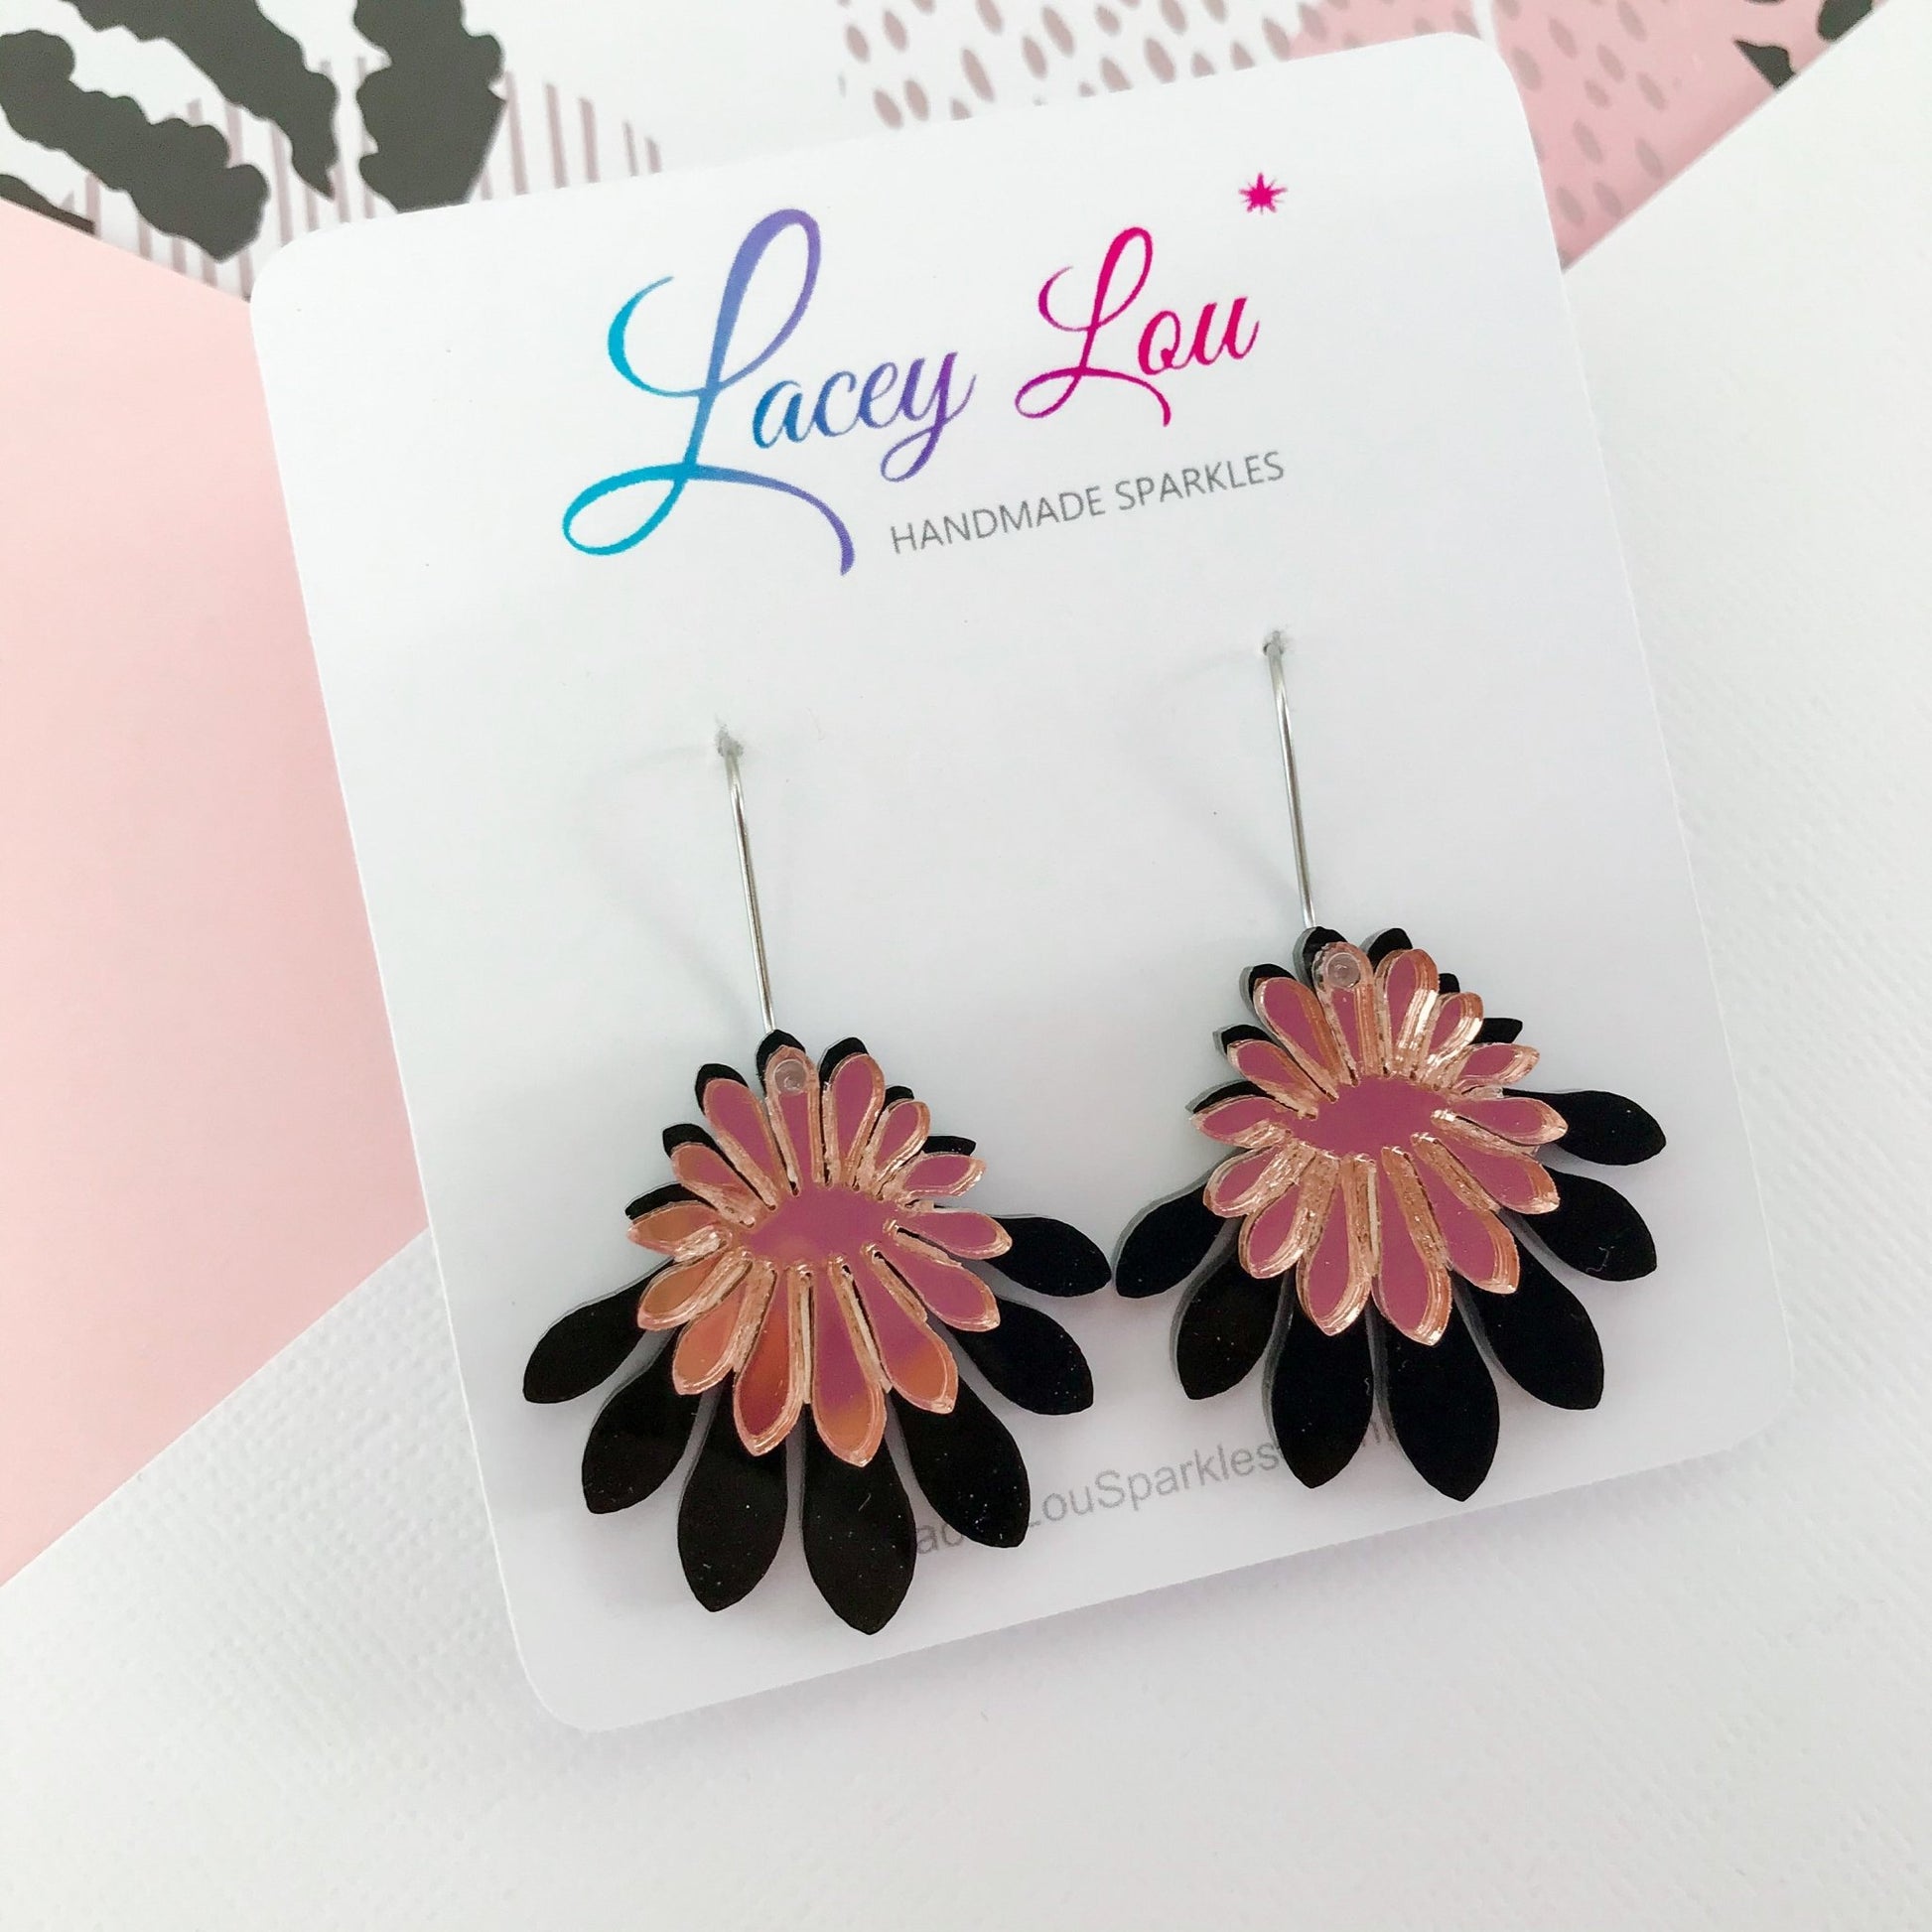 Medium Flower Frill Statement Dangle - Black and Rose Gold - Lacey Lou Sparkles